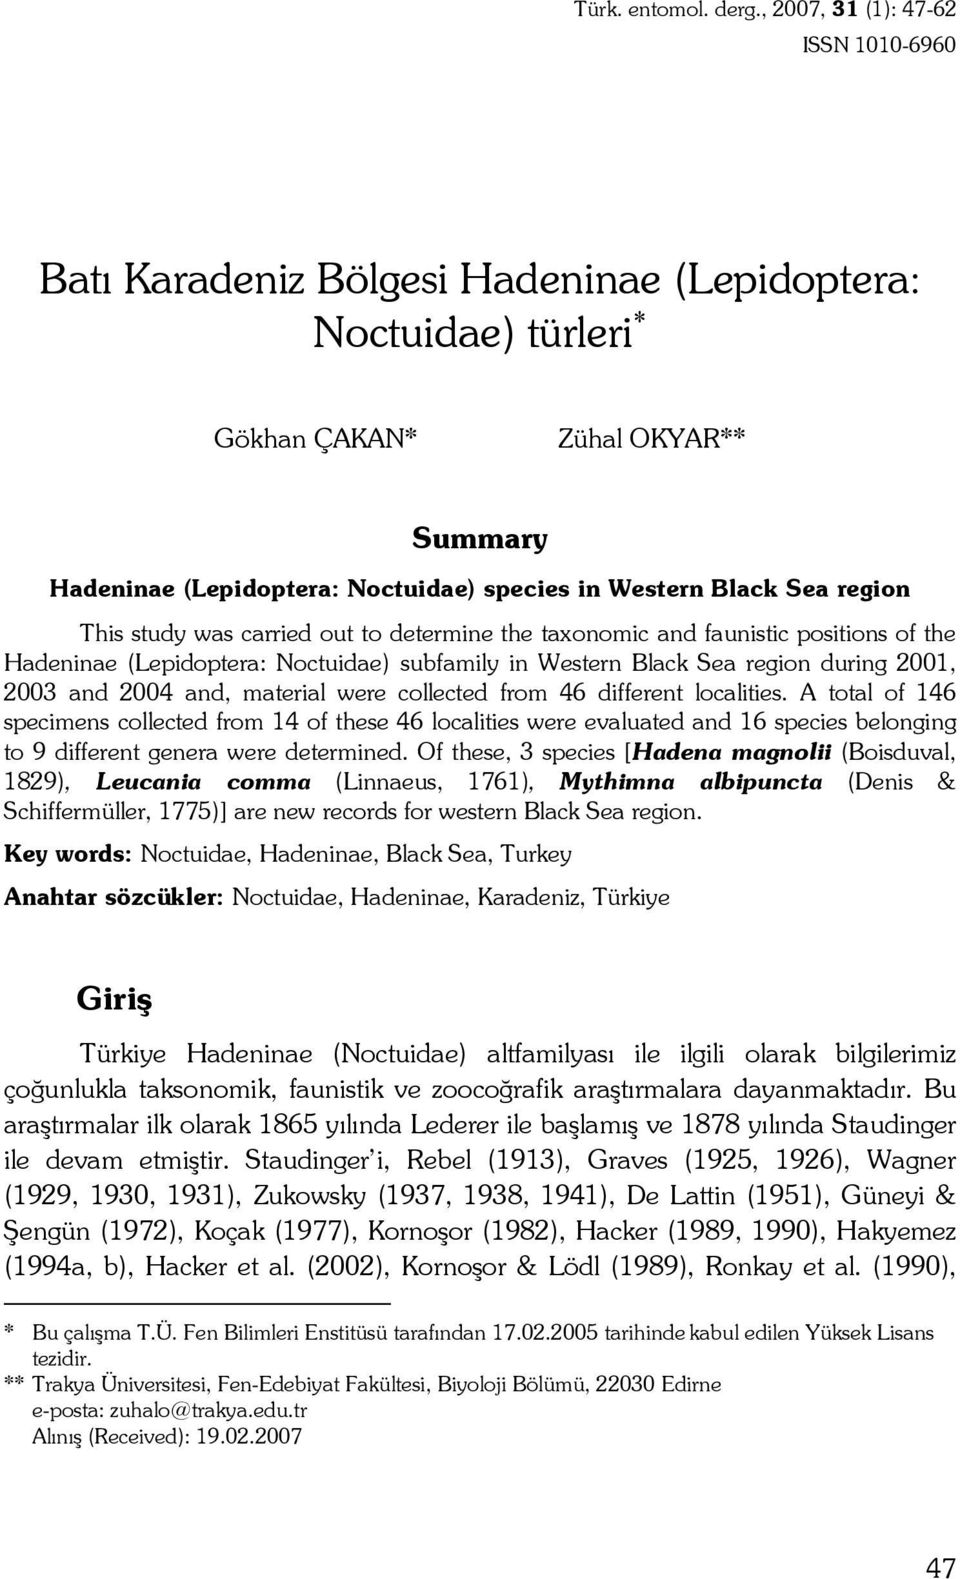 Sea region This study was carried out to determine the taxonomic and faunistic positions of the Hadeninae (Lepidoptera: Noctuidae) subfamily in Western Black Sea region during 2001, 2003 and 2004